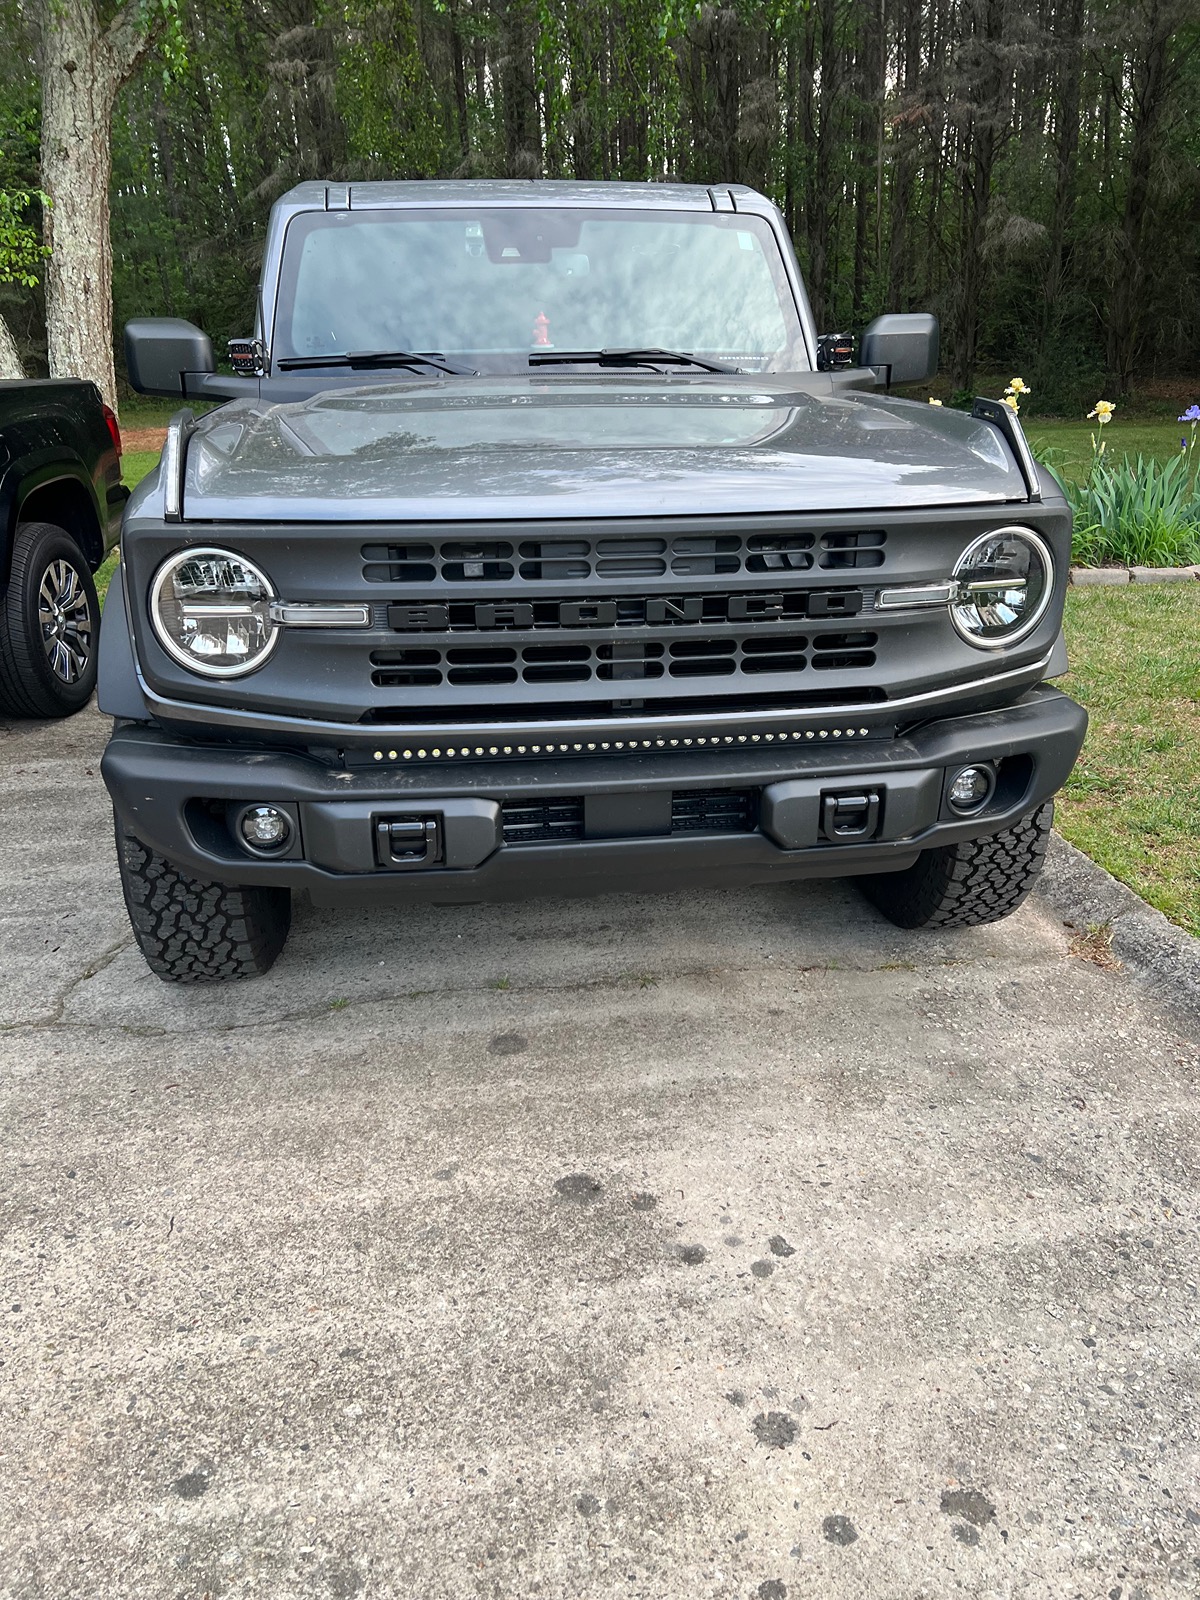 Ford Bronco Front End Friday! Show off your Bronco! IMG_3312